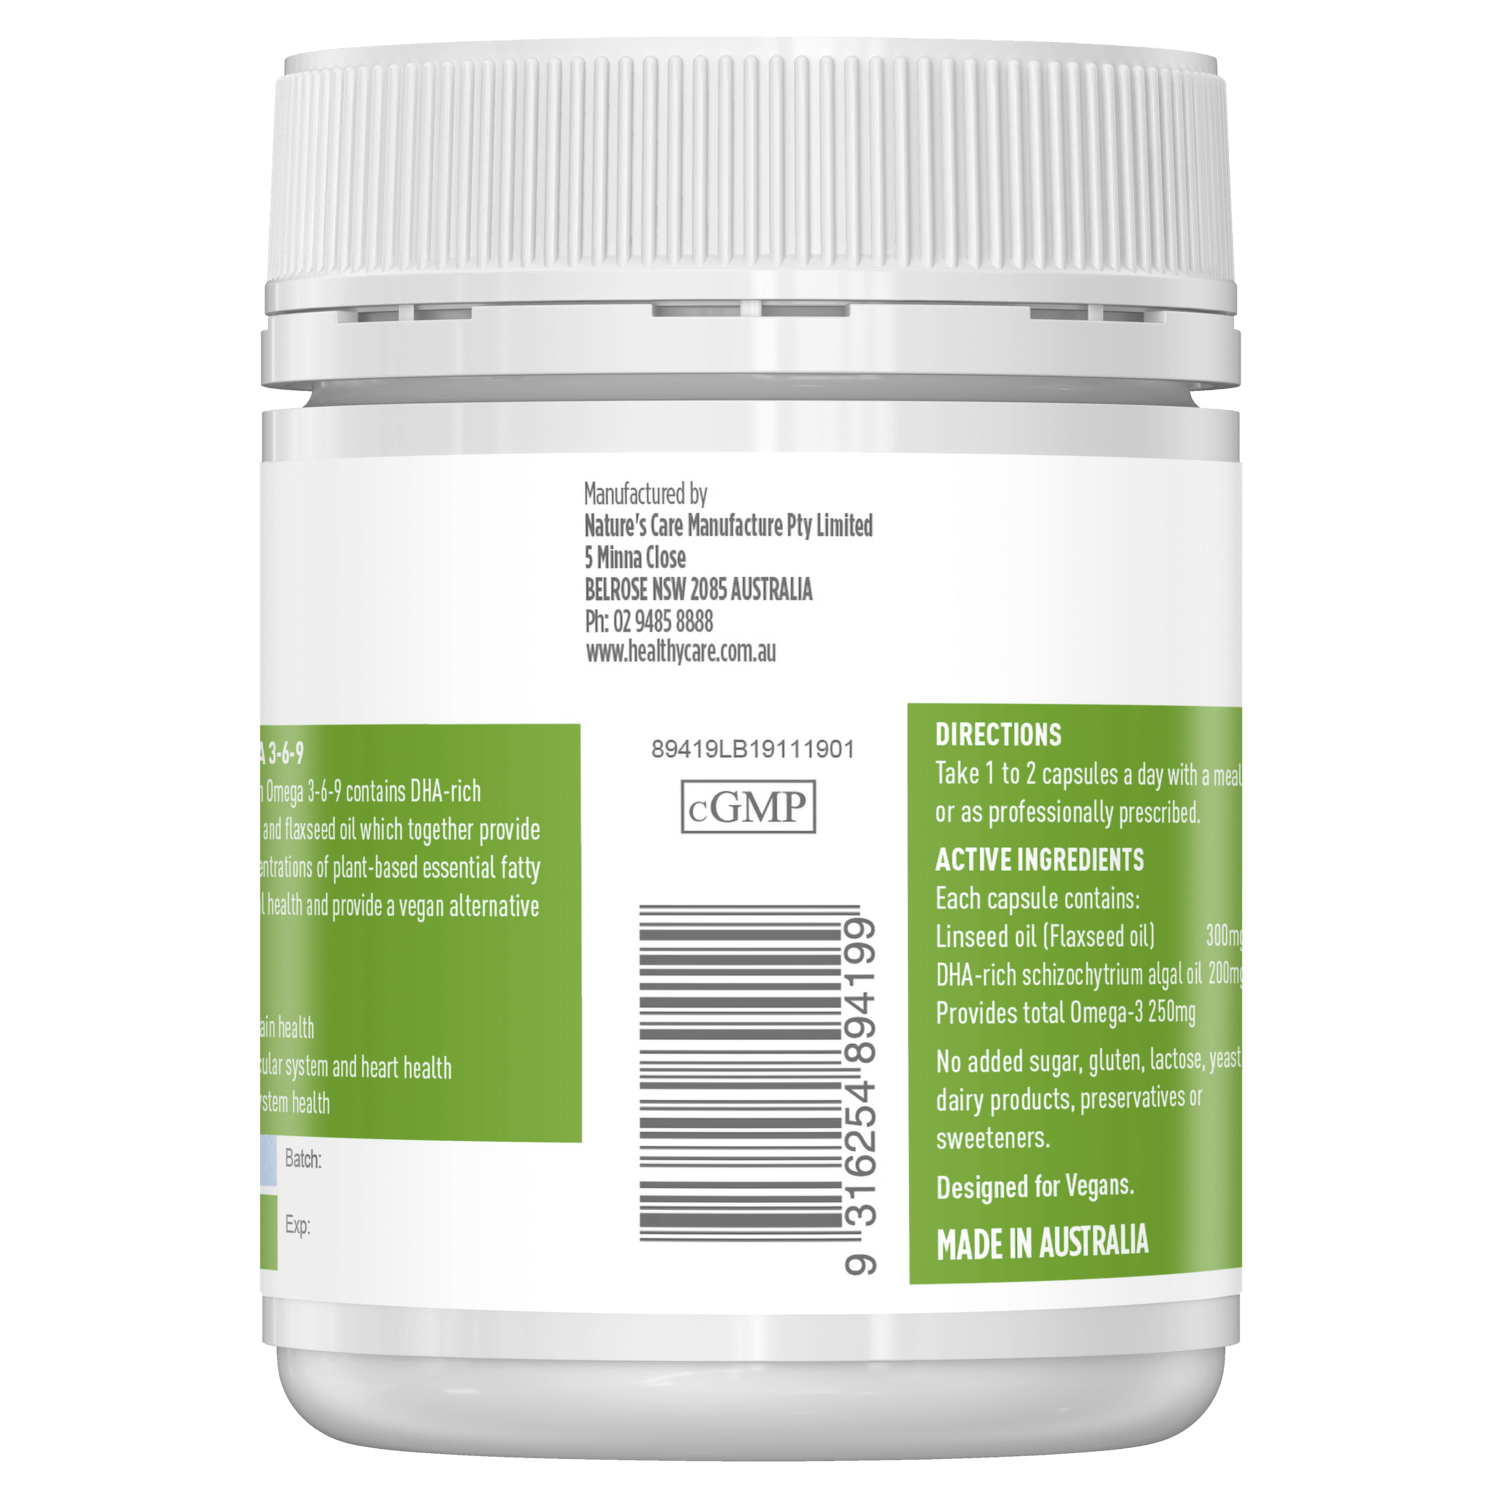 Manufacturer and Barcode of Pure Vegan Omega 3-6-9 60 Capsules-Healthy Care Australia